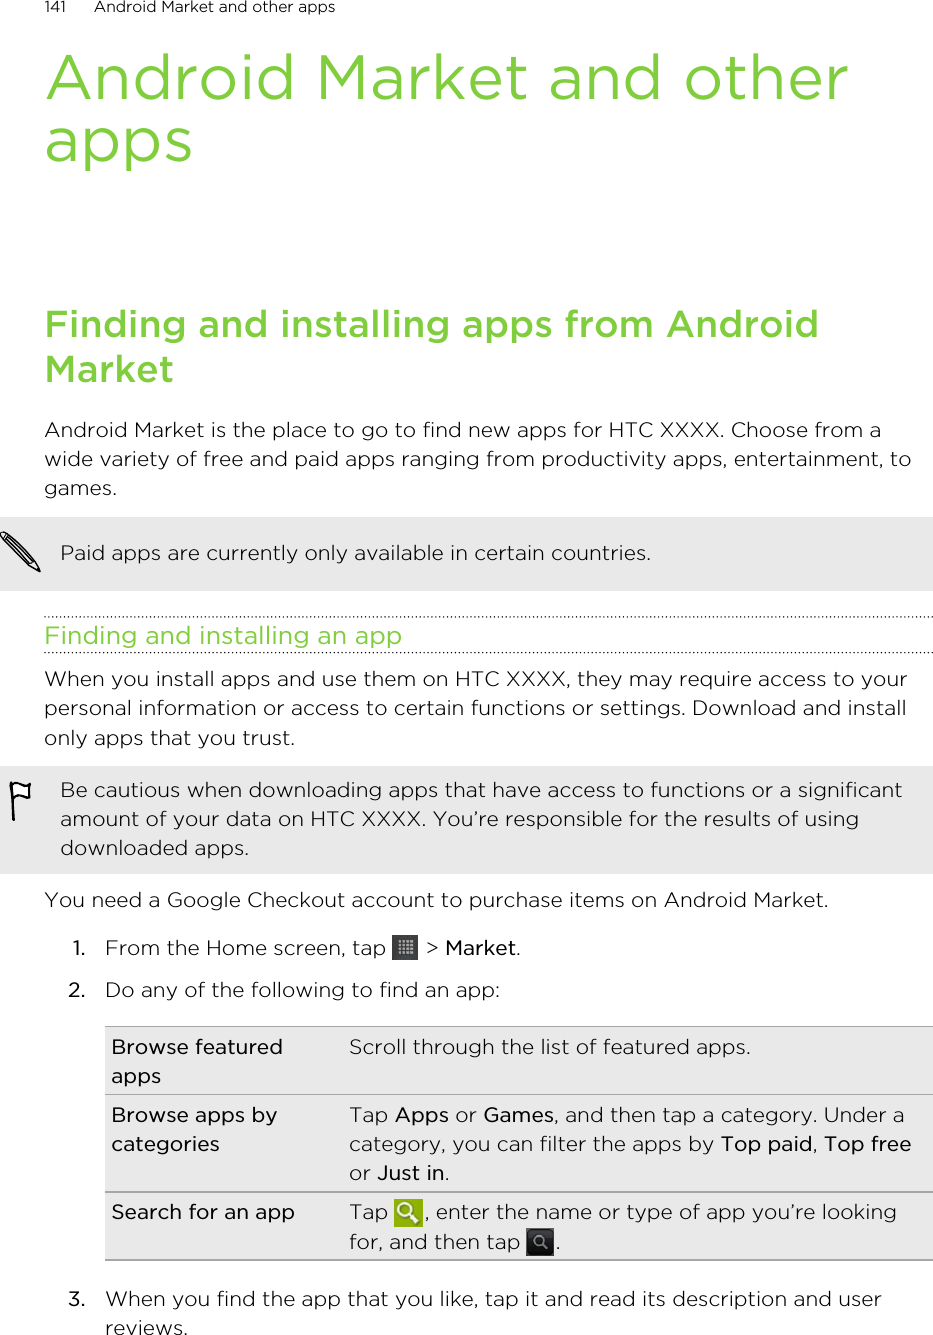 Android Market and otherappsFinding and installing apps from AndroidMarketAndroid Market is the place to go to find new apps for HTC XXXX. Choose from awide variety of free and paid apps ranging from productivity apps, entertainment, togames.Paid apps are currently only available in certain countries.Finding and installing an appWhen you install apps and use them on HTC XXXX, they may require access to yourpersonal information or access to certain functions or settings. Download and installonly apps that you trust.Be cautious when downloading apps that have access to functions or a significantamount of your data on HTC XXXX. You’re responsible for the results of usingdownloaded apps.You need a Google Checkout account to purchase items on Android Market.1. From the Home screen, tap   &gt; Market.2. Do any of the following to find an app:Browse featuredappsScroll through the list of featured apps.Browse apps bycategoriesTap Apps or Games, and then tap a category. Under acategory, you can filter the apps by Top paid, Top freeor Just in.Search for an app Tap  , enter the name or type of app you’re lookingfor, and then tap  .3. When you find the app that you like, tap it and read its description and userreviews.141 Android Market and other apps